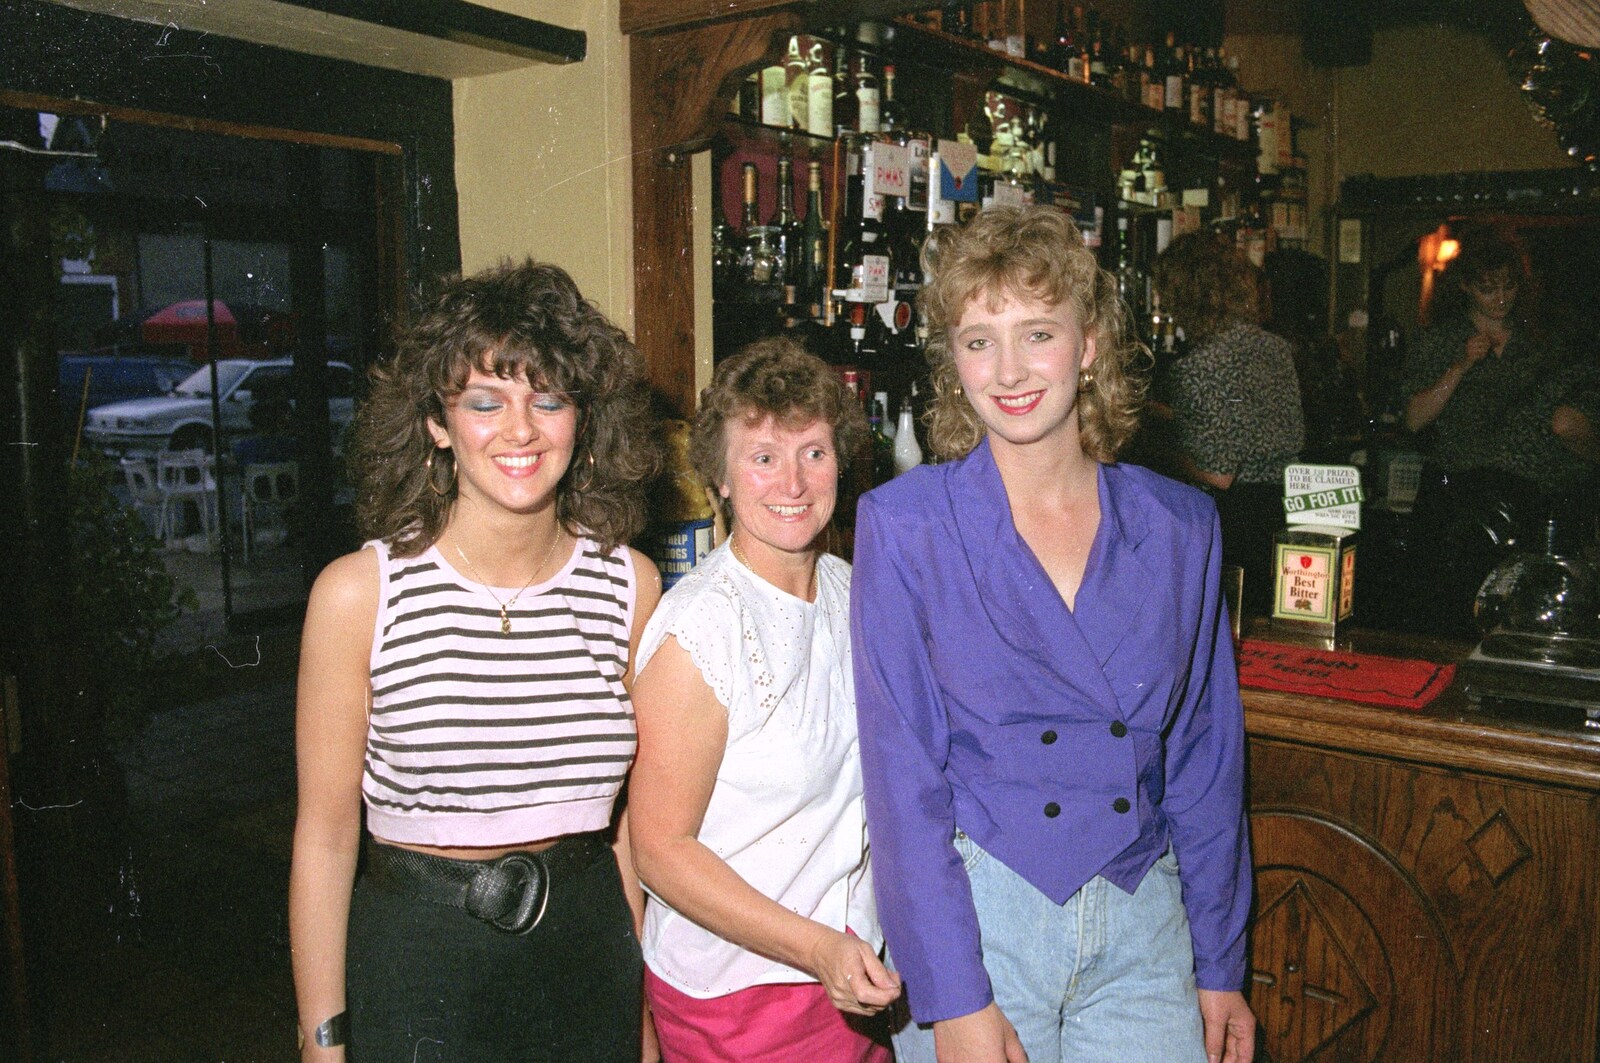 Stuston Sewerage and Kate's Printec Birthday, Scole Inn, Norfolk and Suffolk - 2nd August 1990: Rachel, Wendy Bedford and Kate